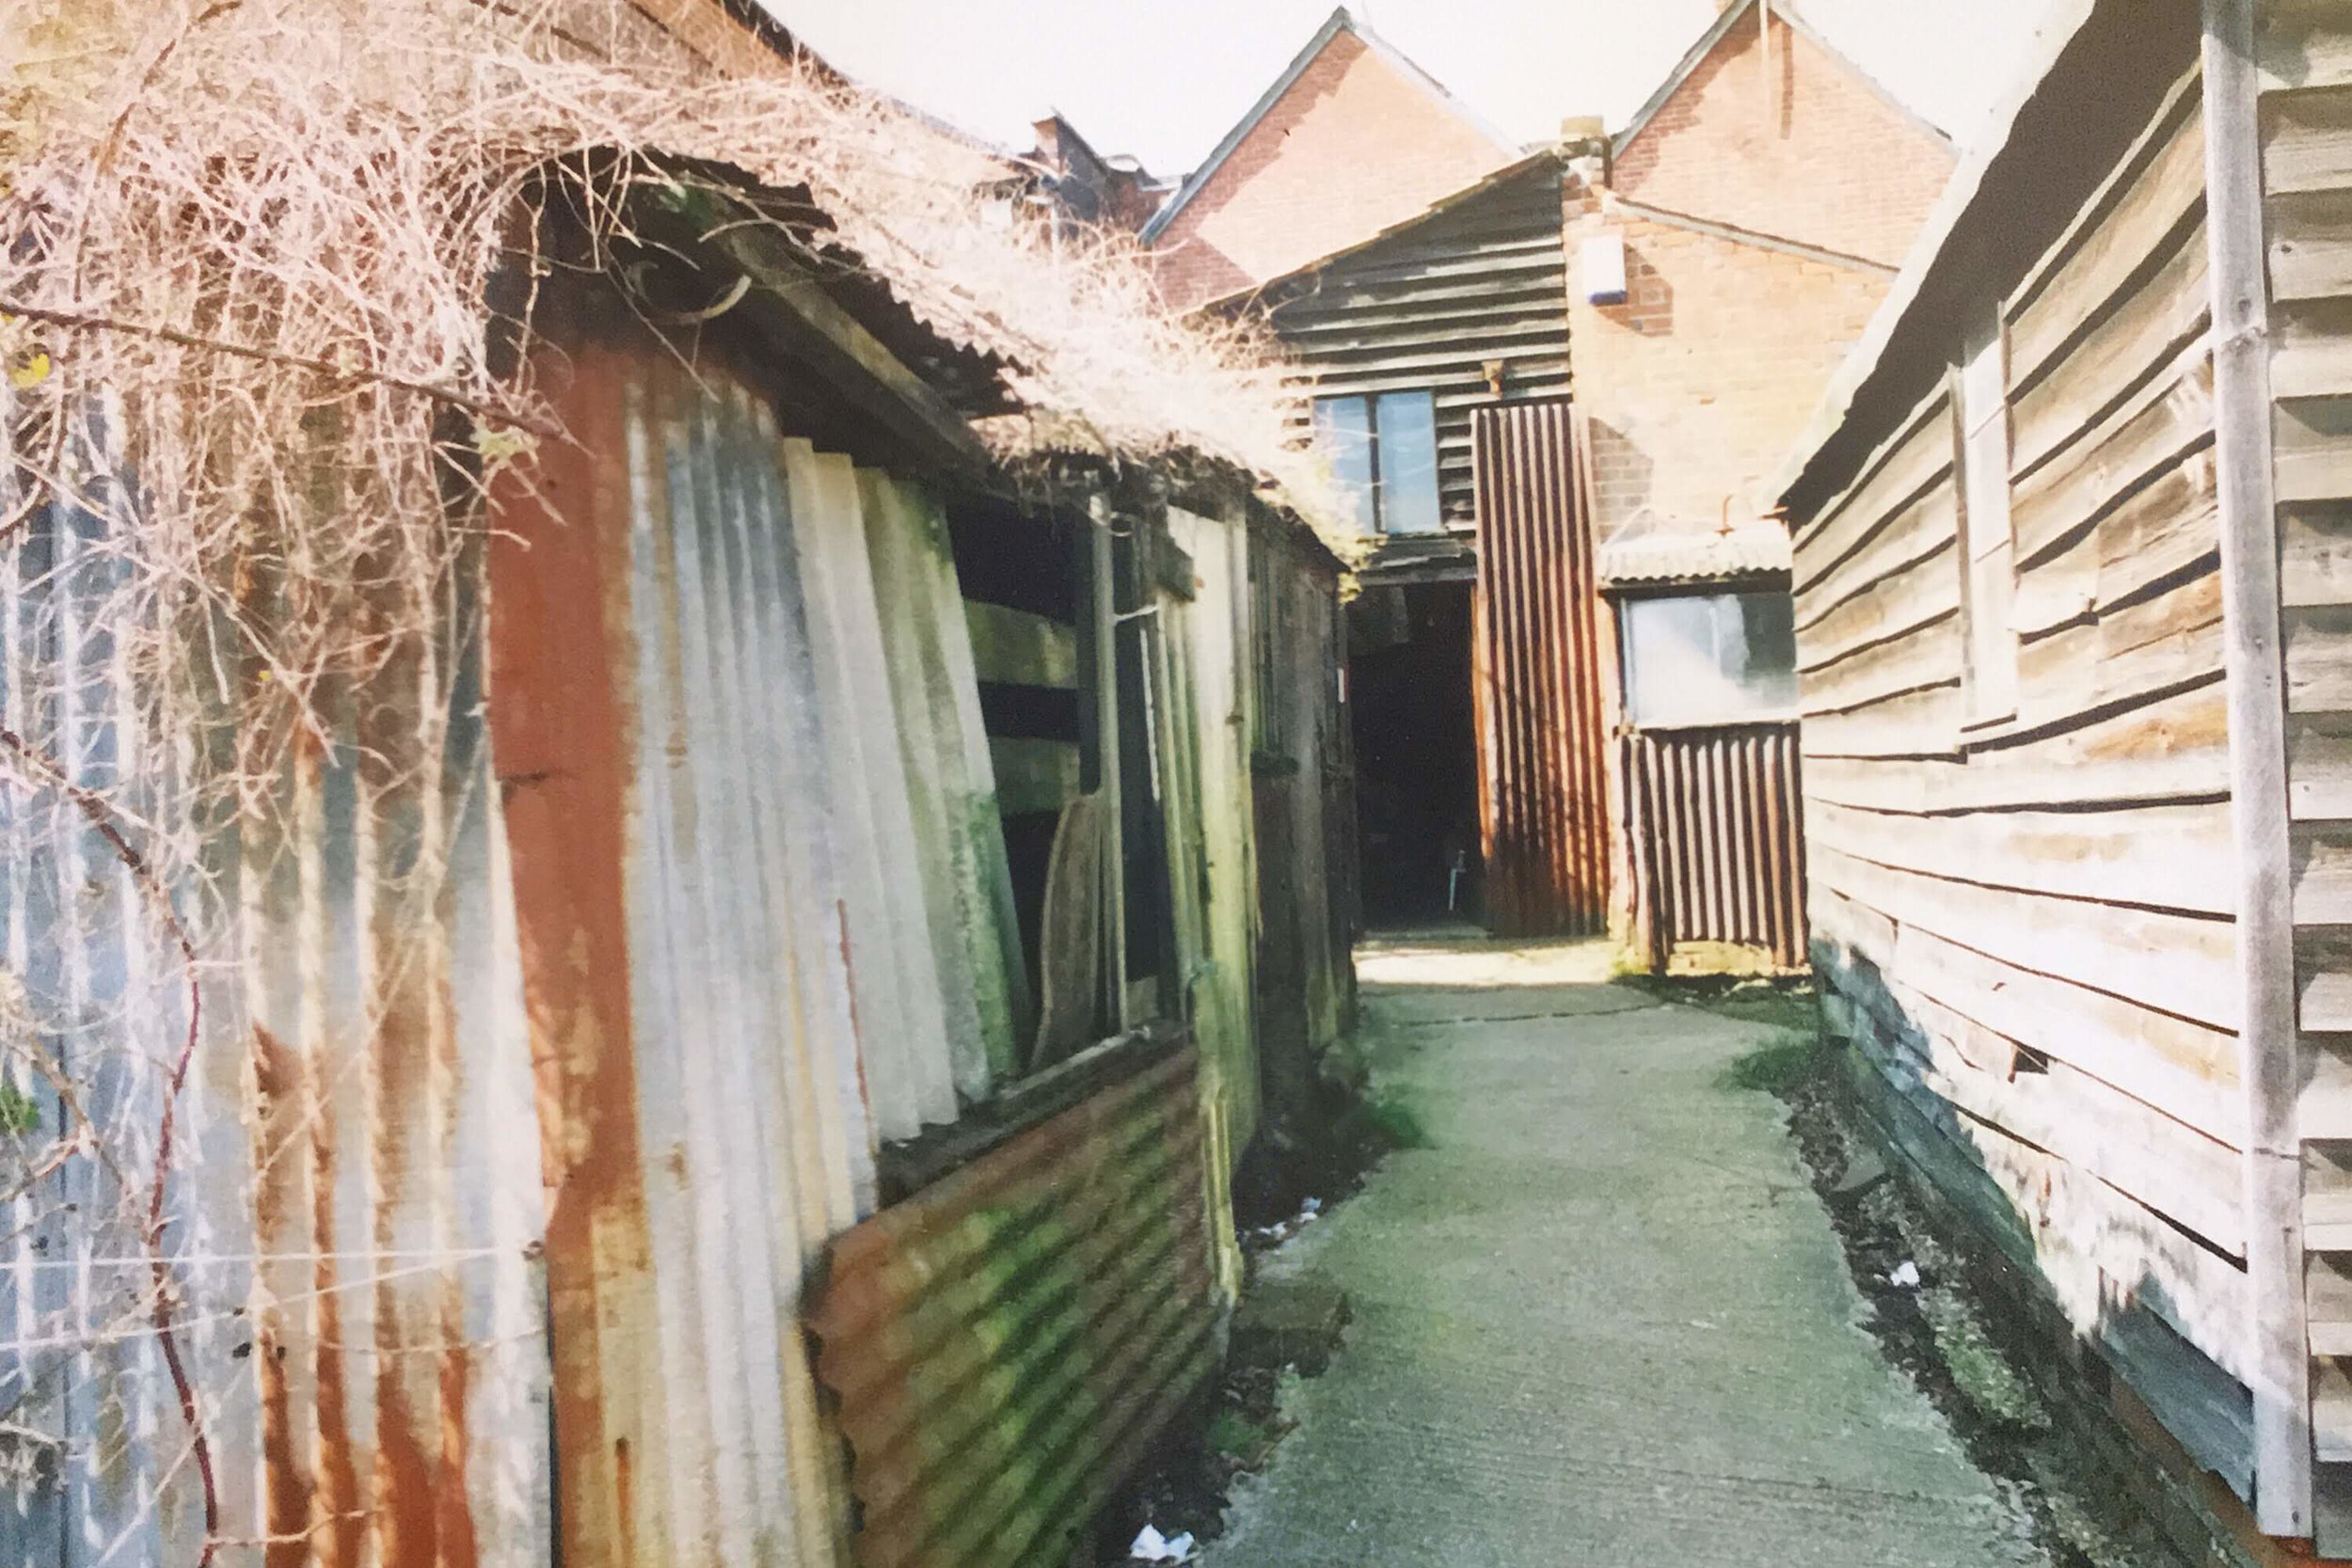 The old sheds in the yard including outside loo!